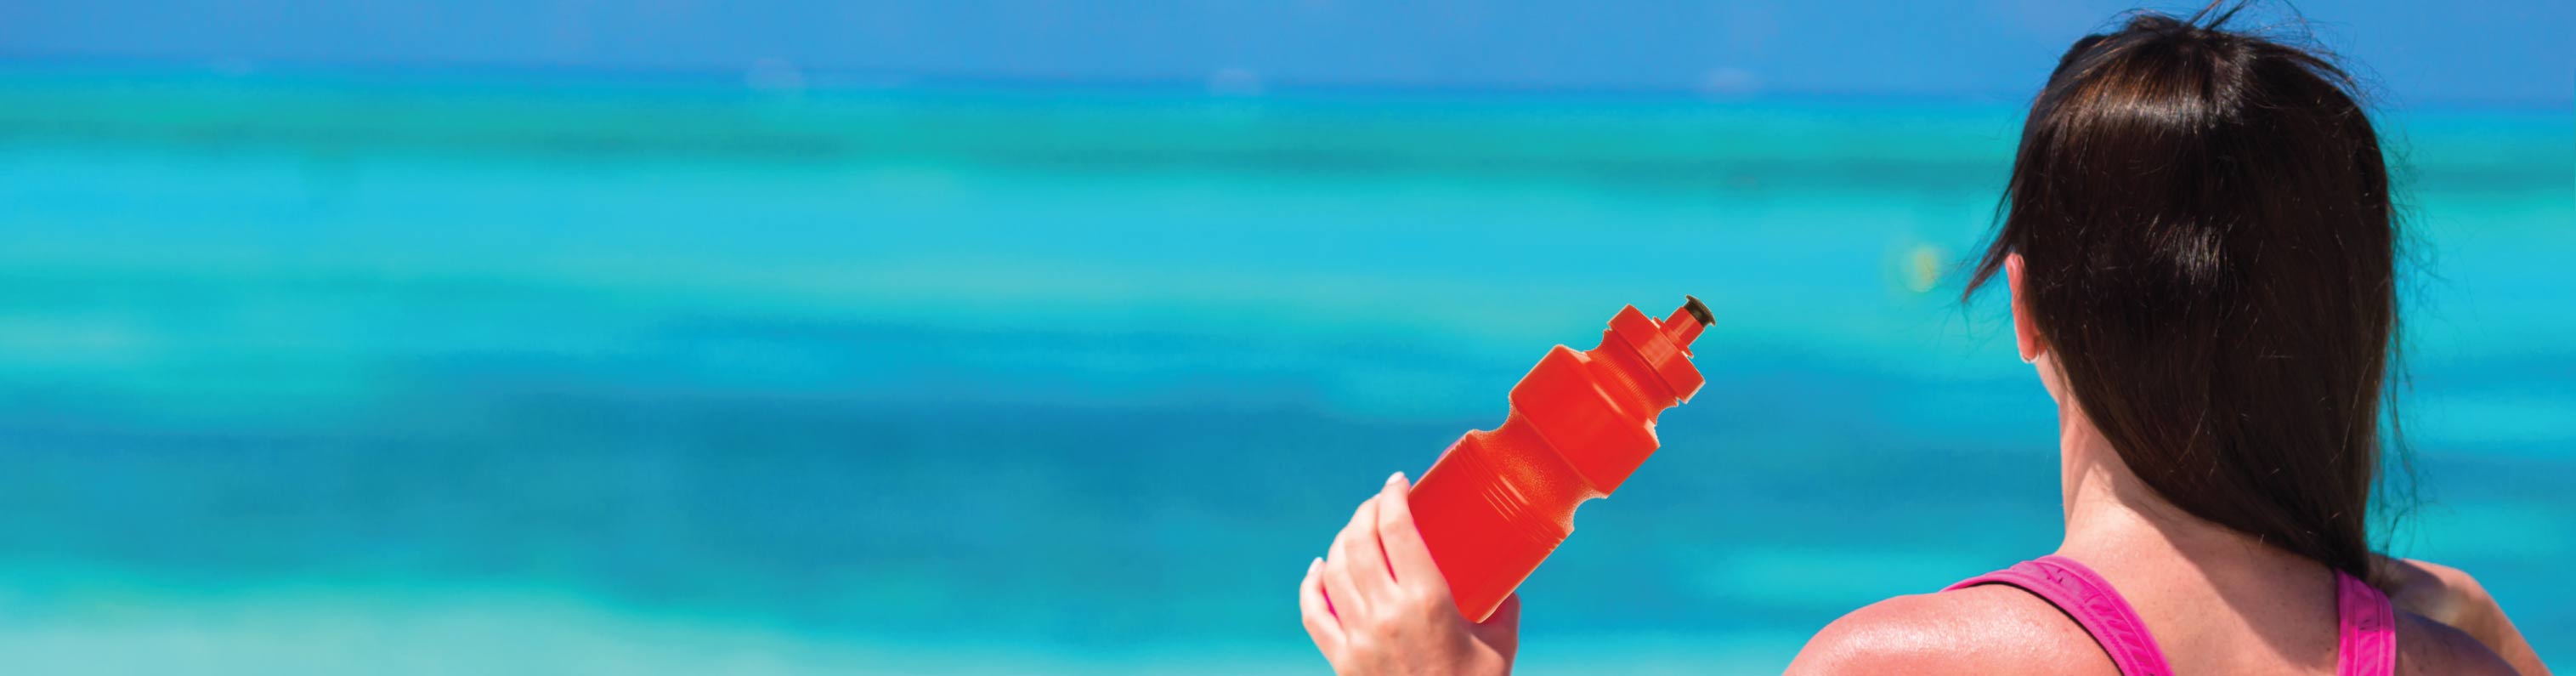  sports water bottles while at the beach